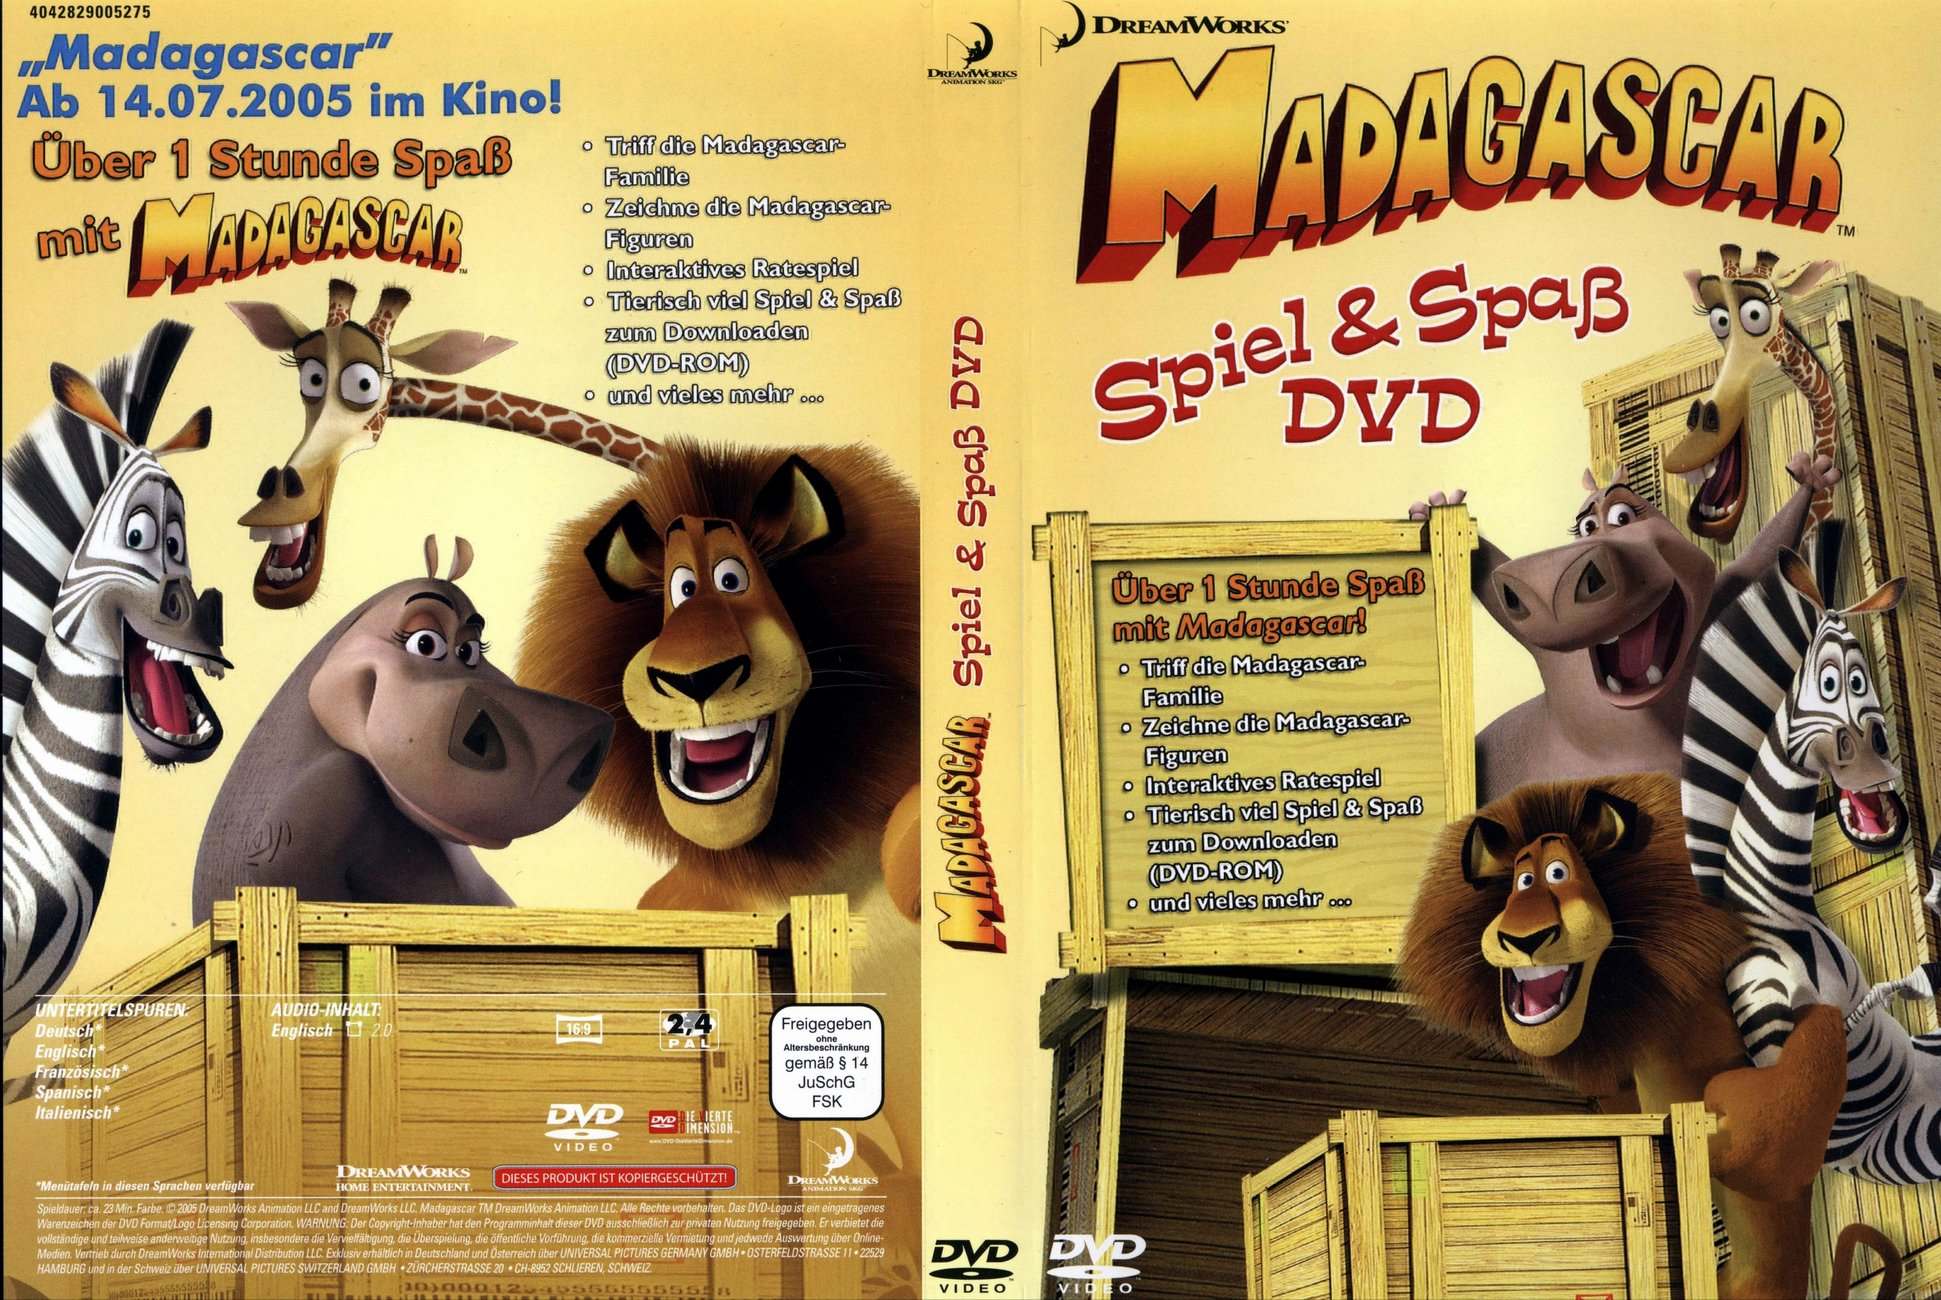 Madagascar Spiel Und Spass Dvd Pc Covers Cover Century Over 500 000 Album Art Covers For Free